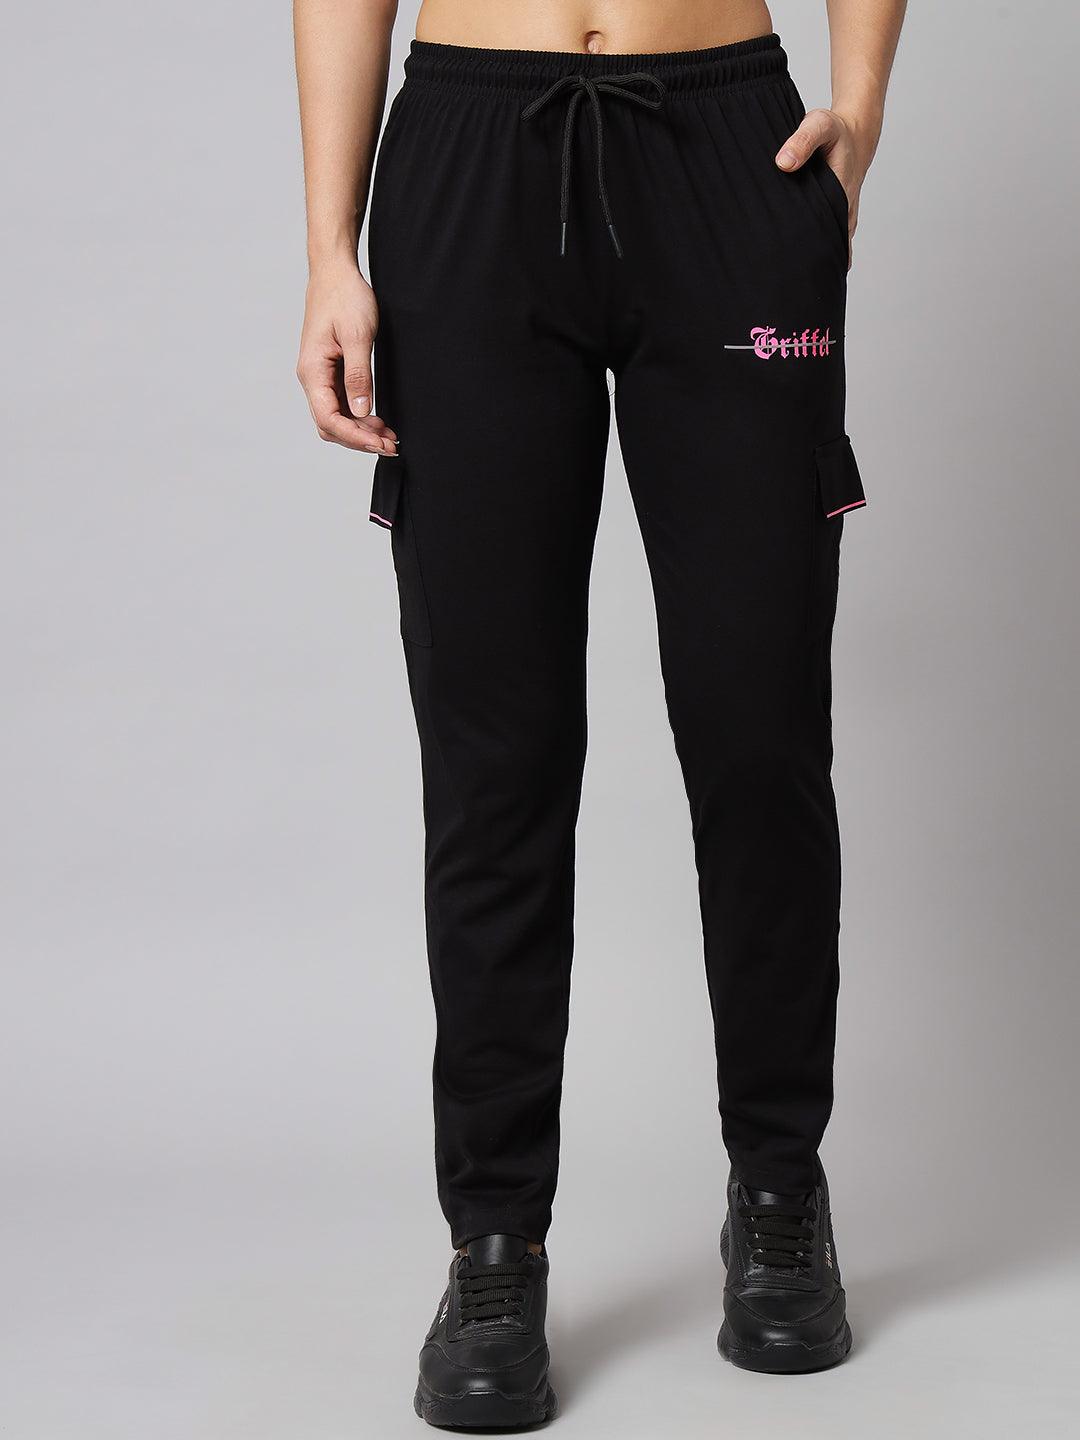 GRIFFEL Women Black Printed Oversized Loose fit T-shirt and Trackpant Set - griffel